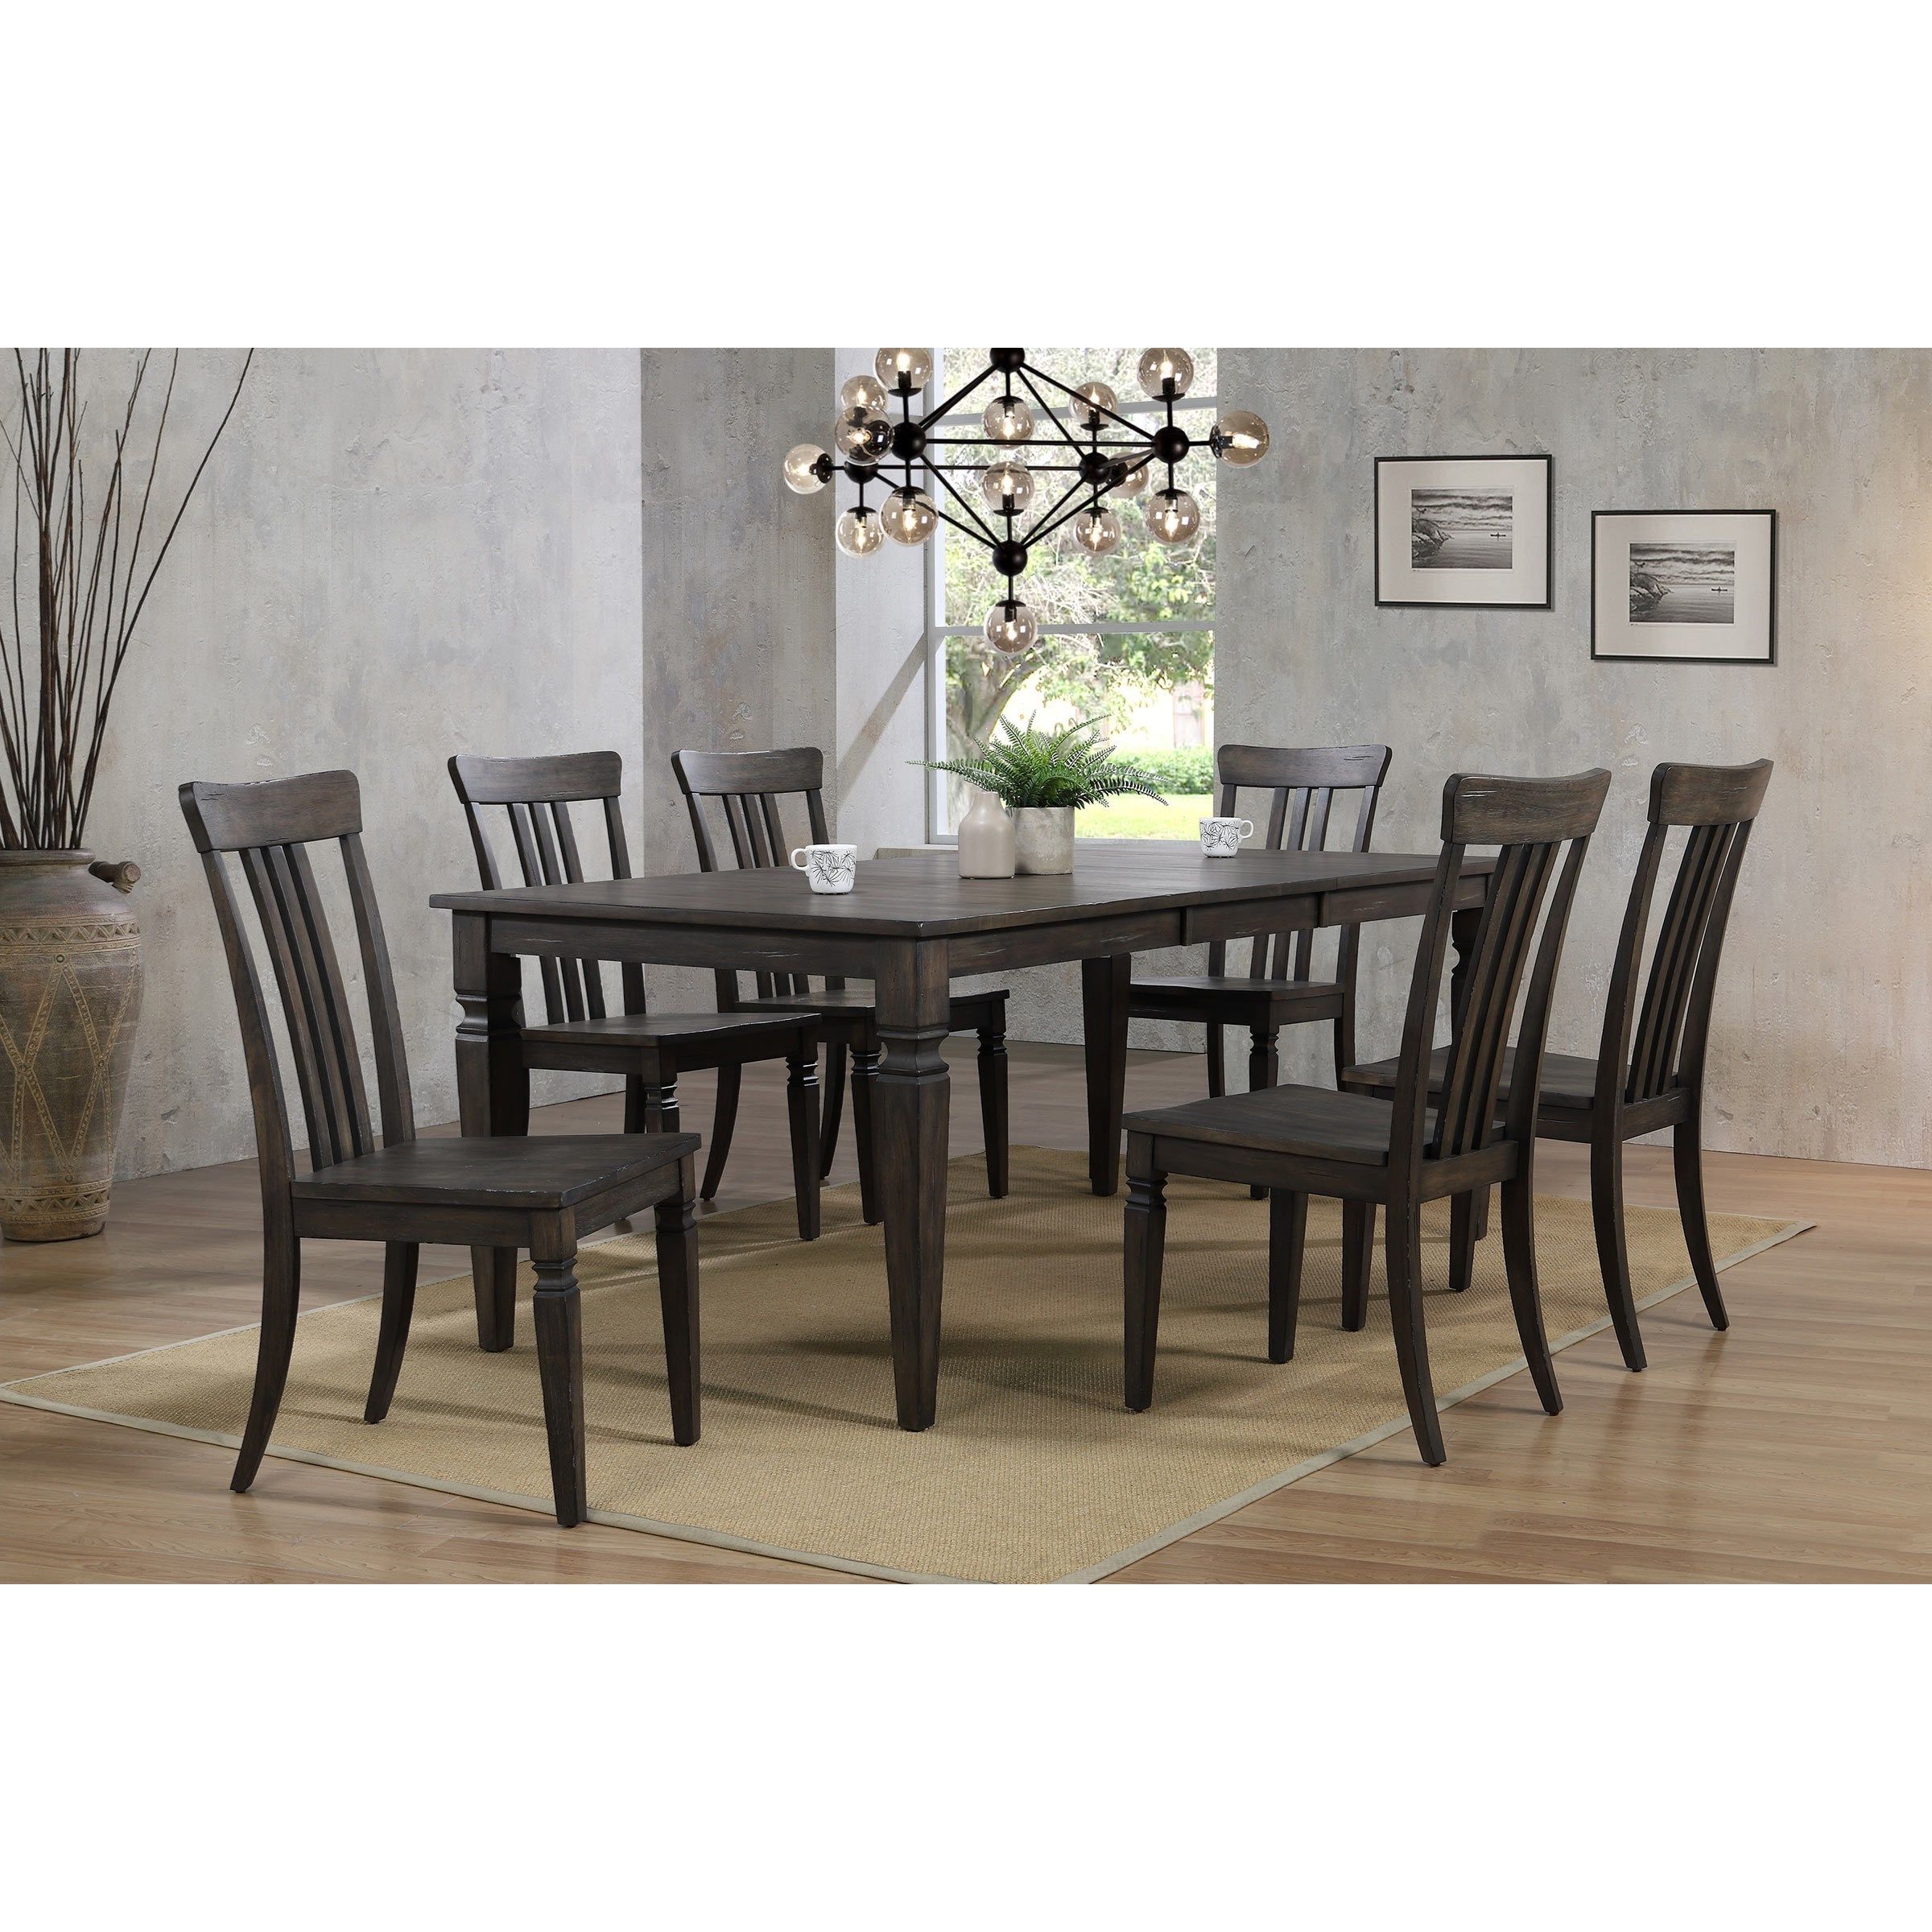 Trendy Brown Dining Tables With Removable Leaves Regarding Jordan Transitional 7 Piece Table And Chair Set With (View 8 of 20)